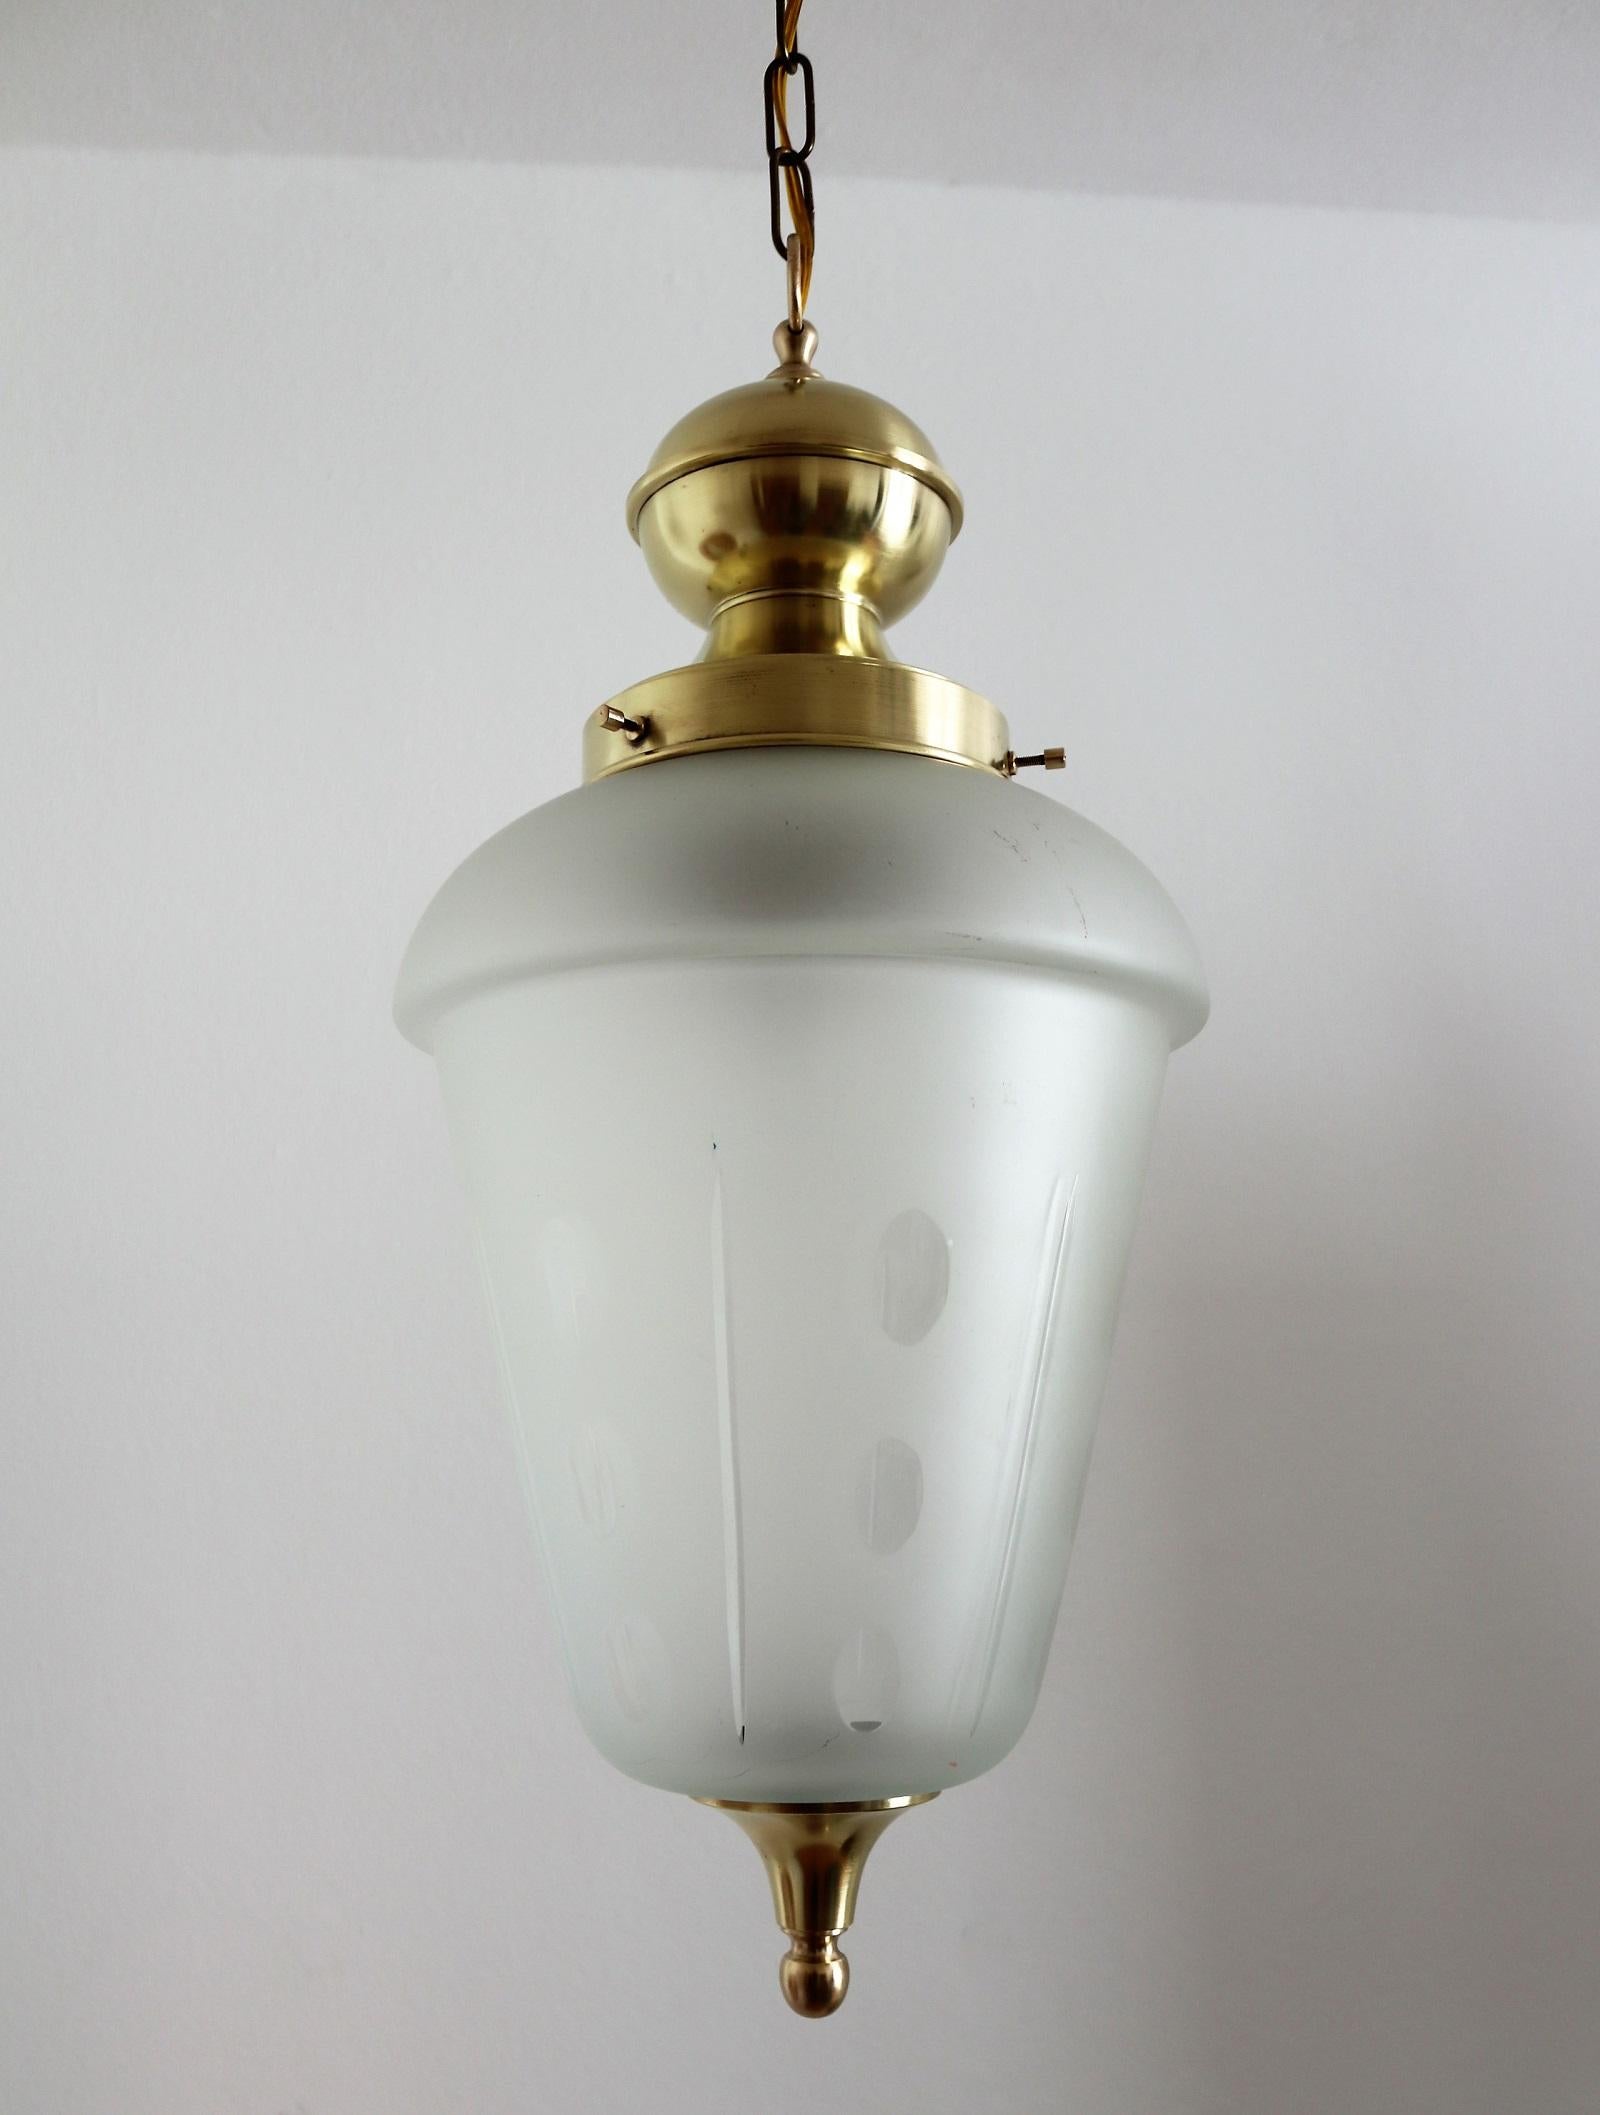 Italian Midcentury Brass and Cut Glass Pendant Lamp or Lantern, 1970s For Sale 3